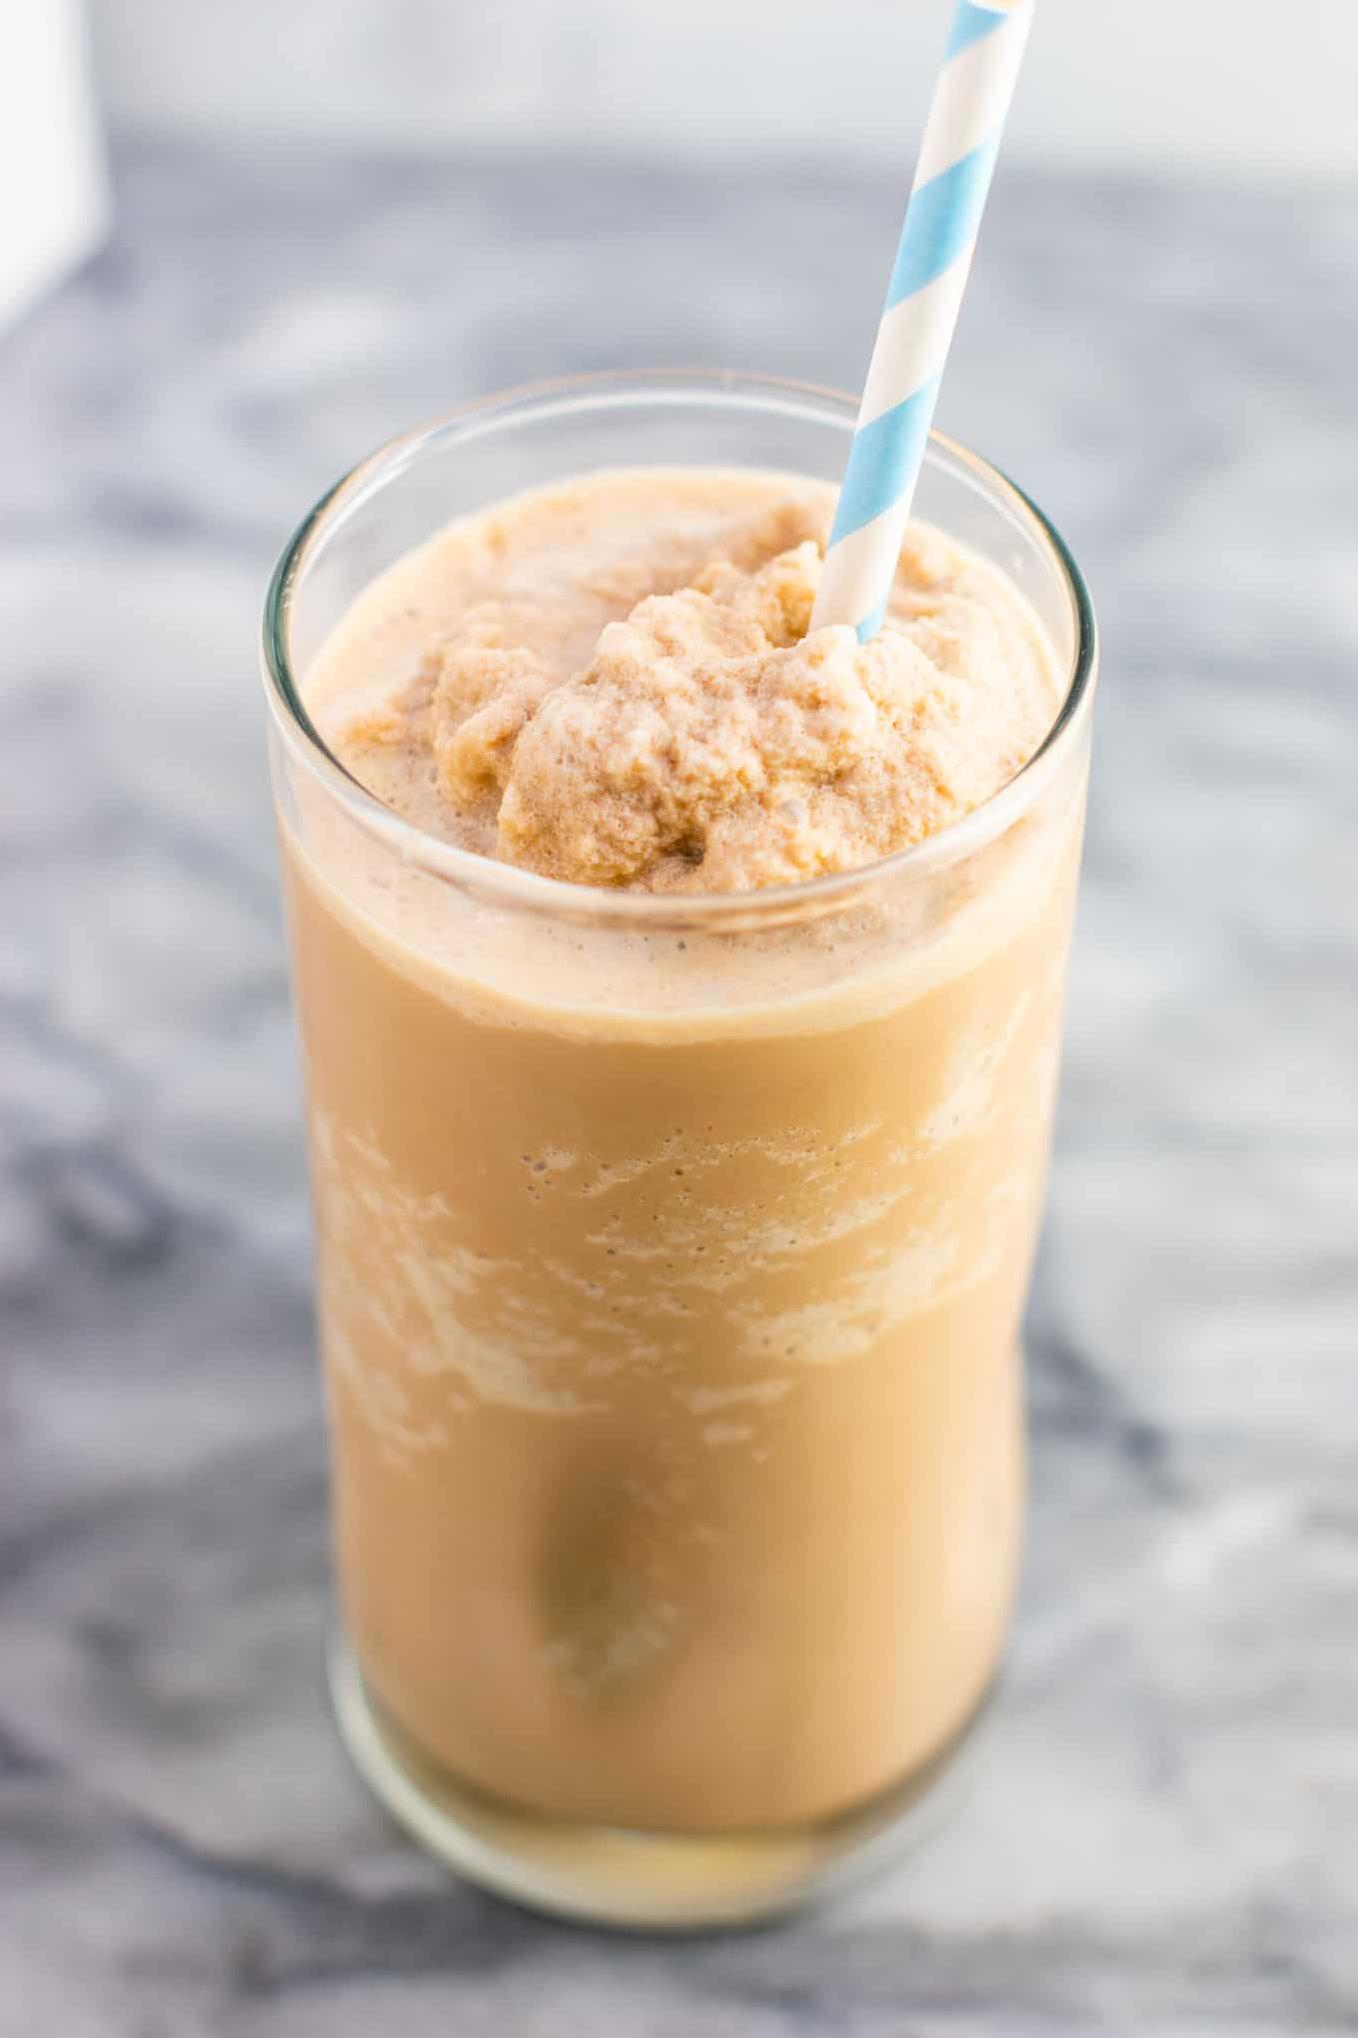  This Vanilla Blended Coffee is like a hug in a mug!